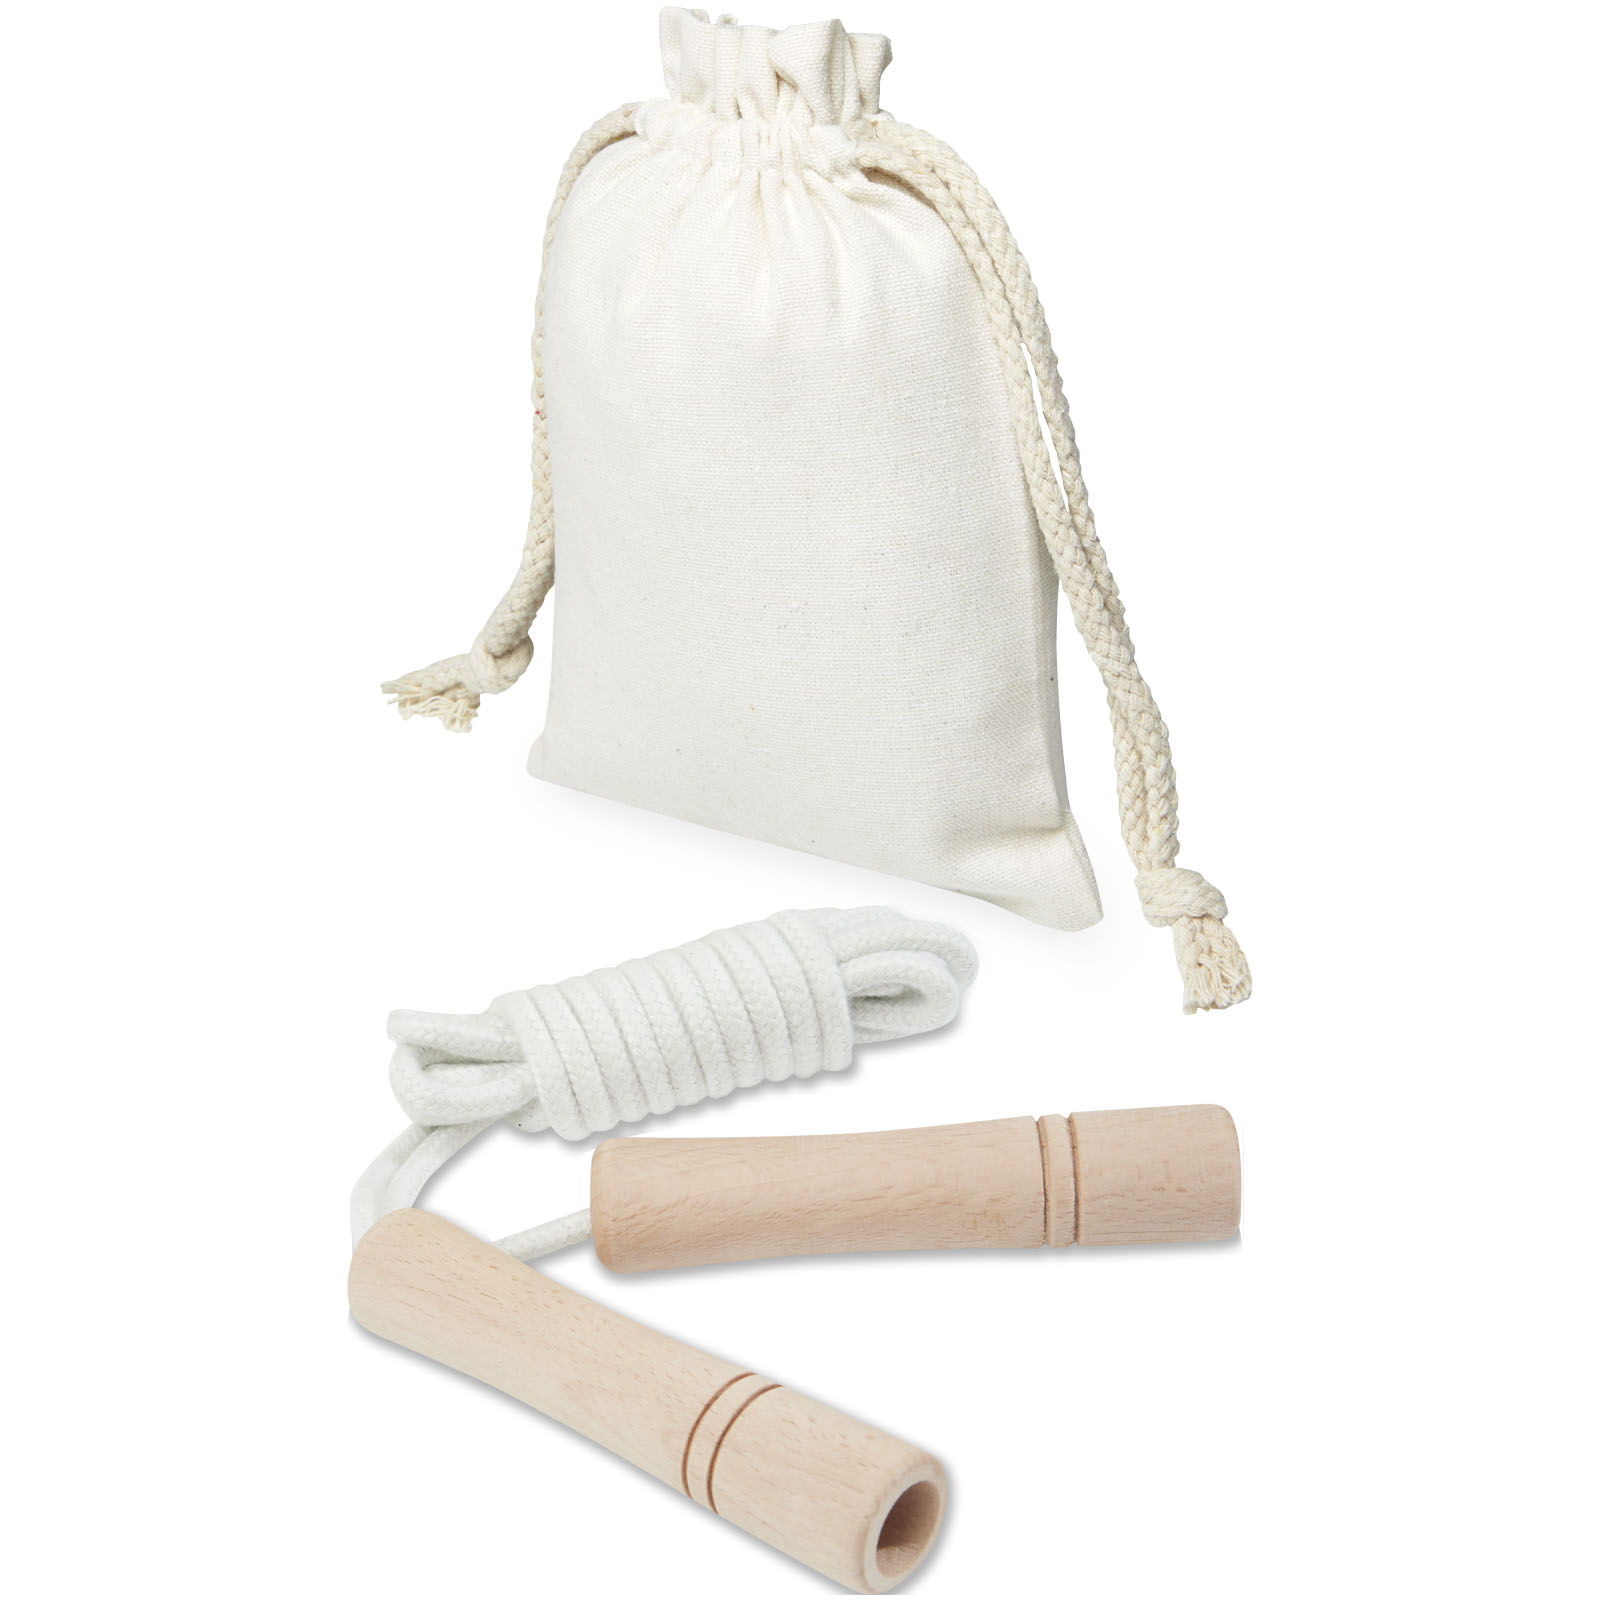 Advertising Fitness & Sport - Denise wooden skipping rope in cotton pouch - 0